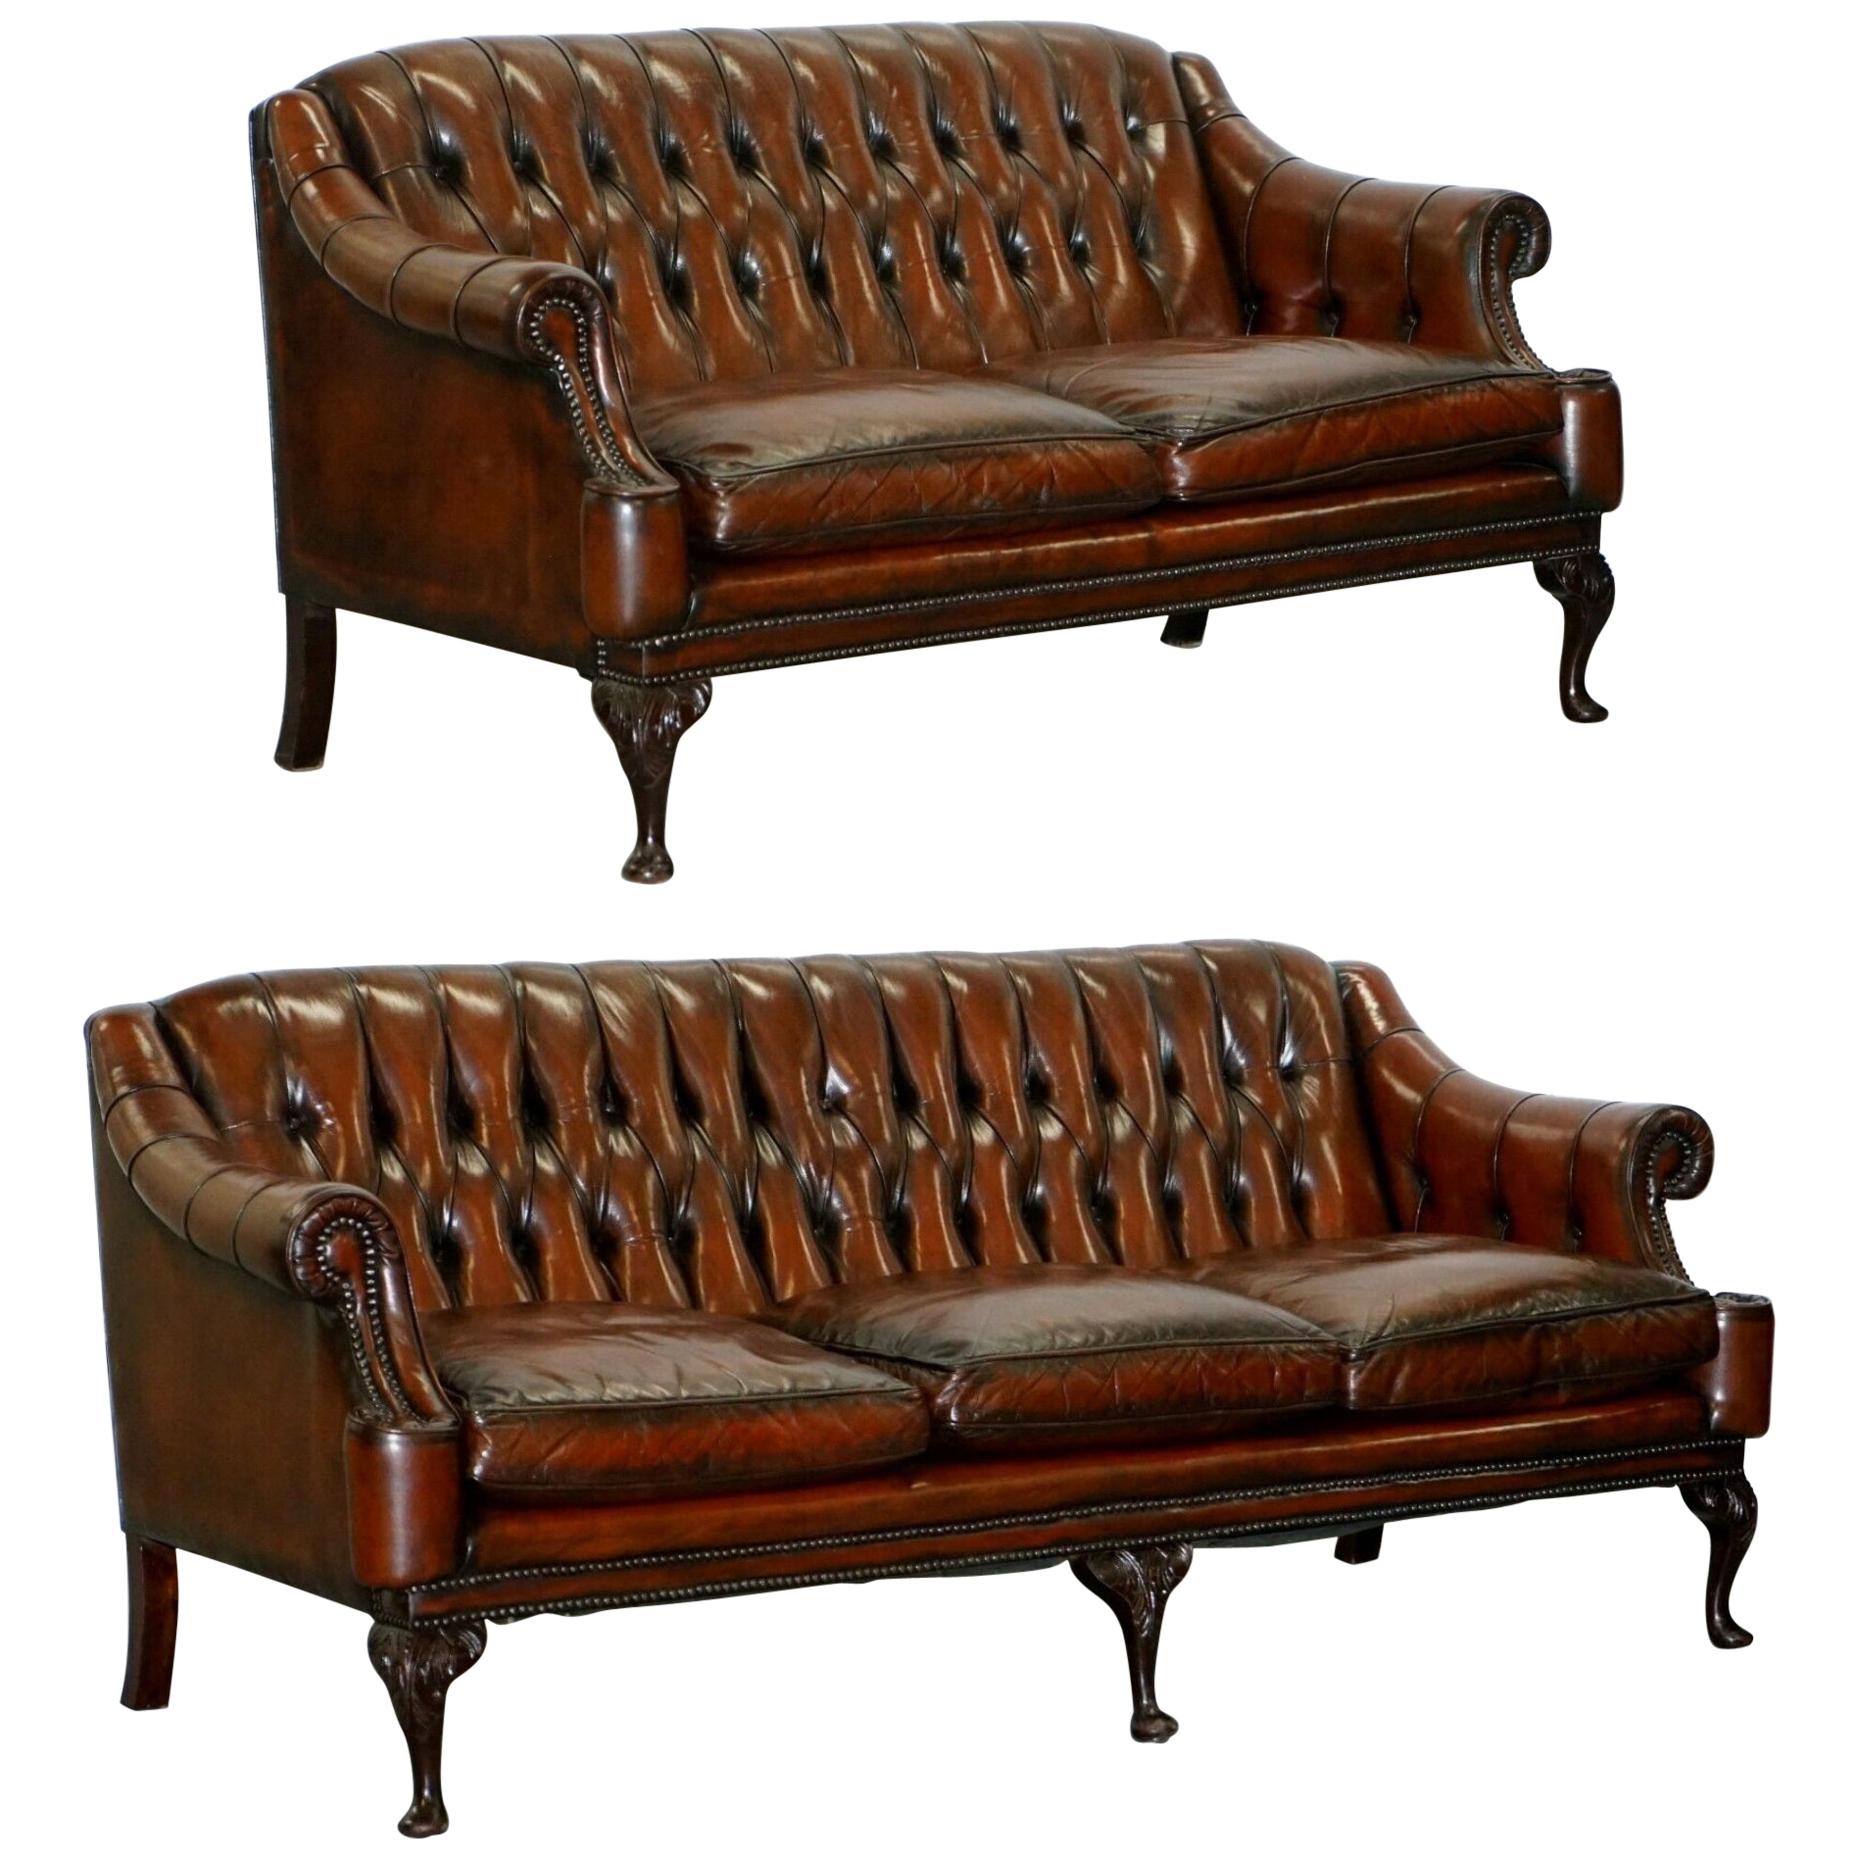 Pair of Restored Lutyen's Viceroy Chesterfield Brown Leather Hand Dyed Sofas